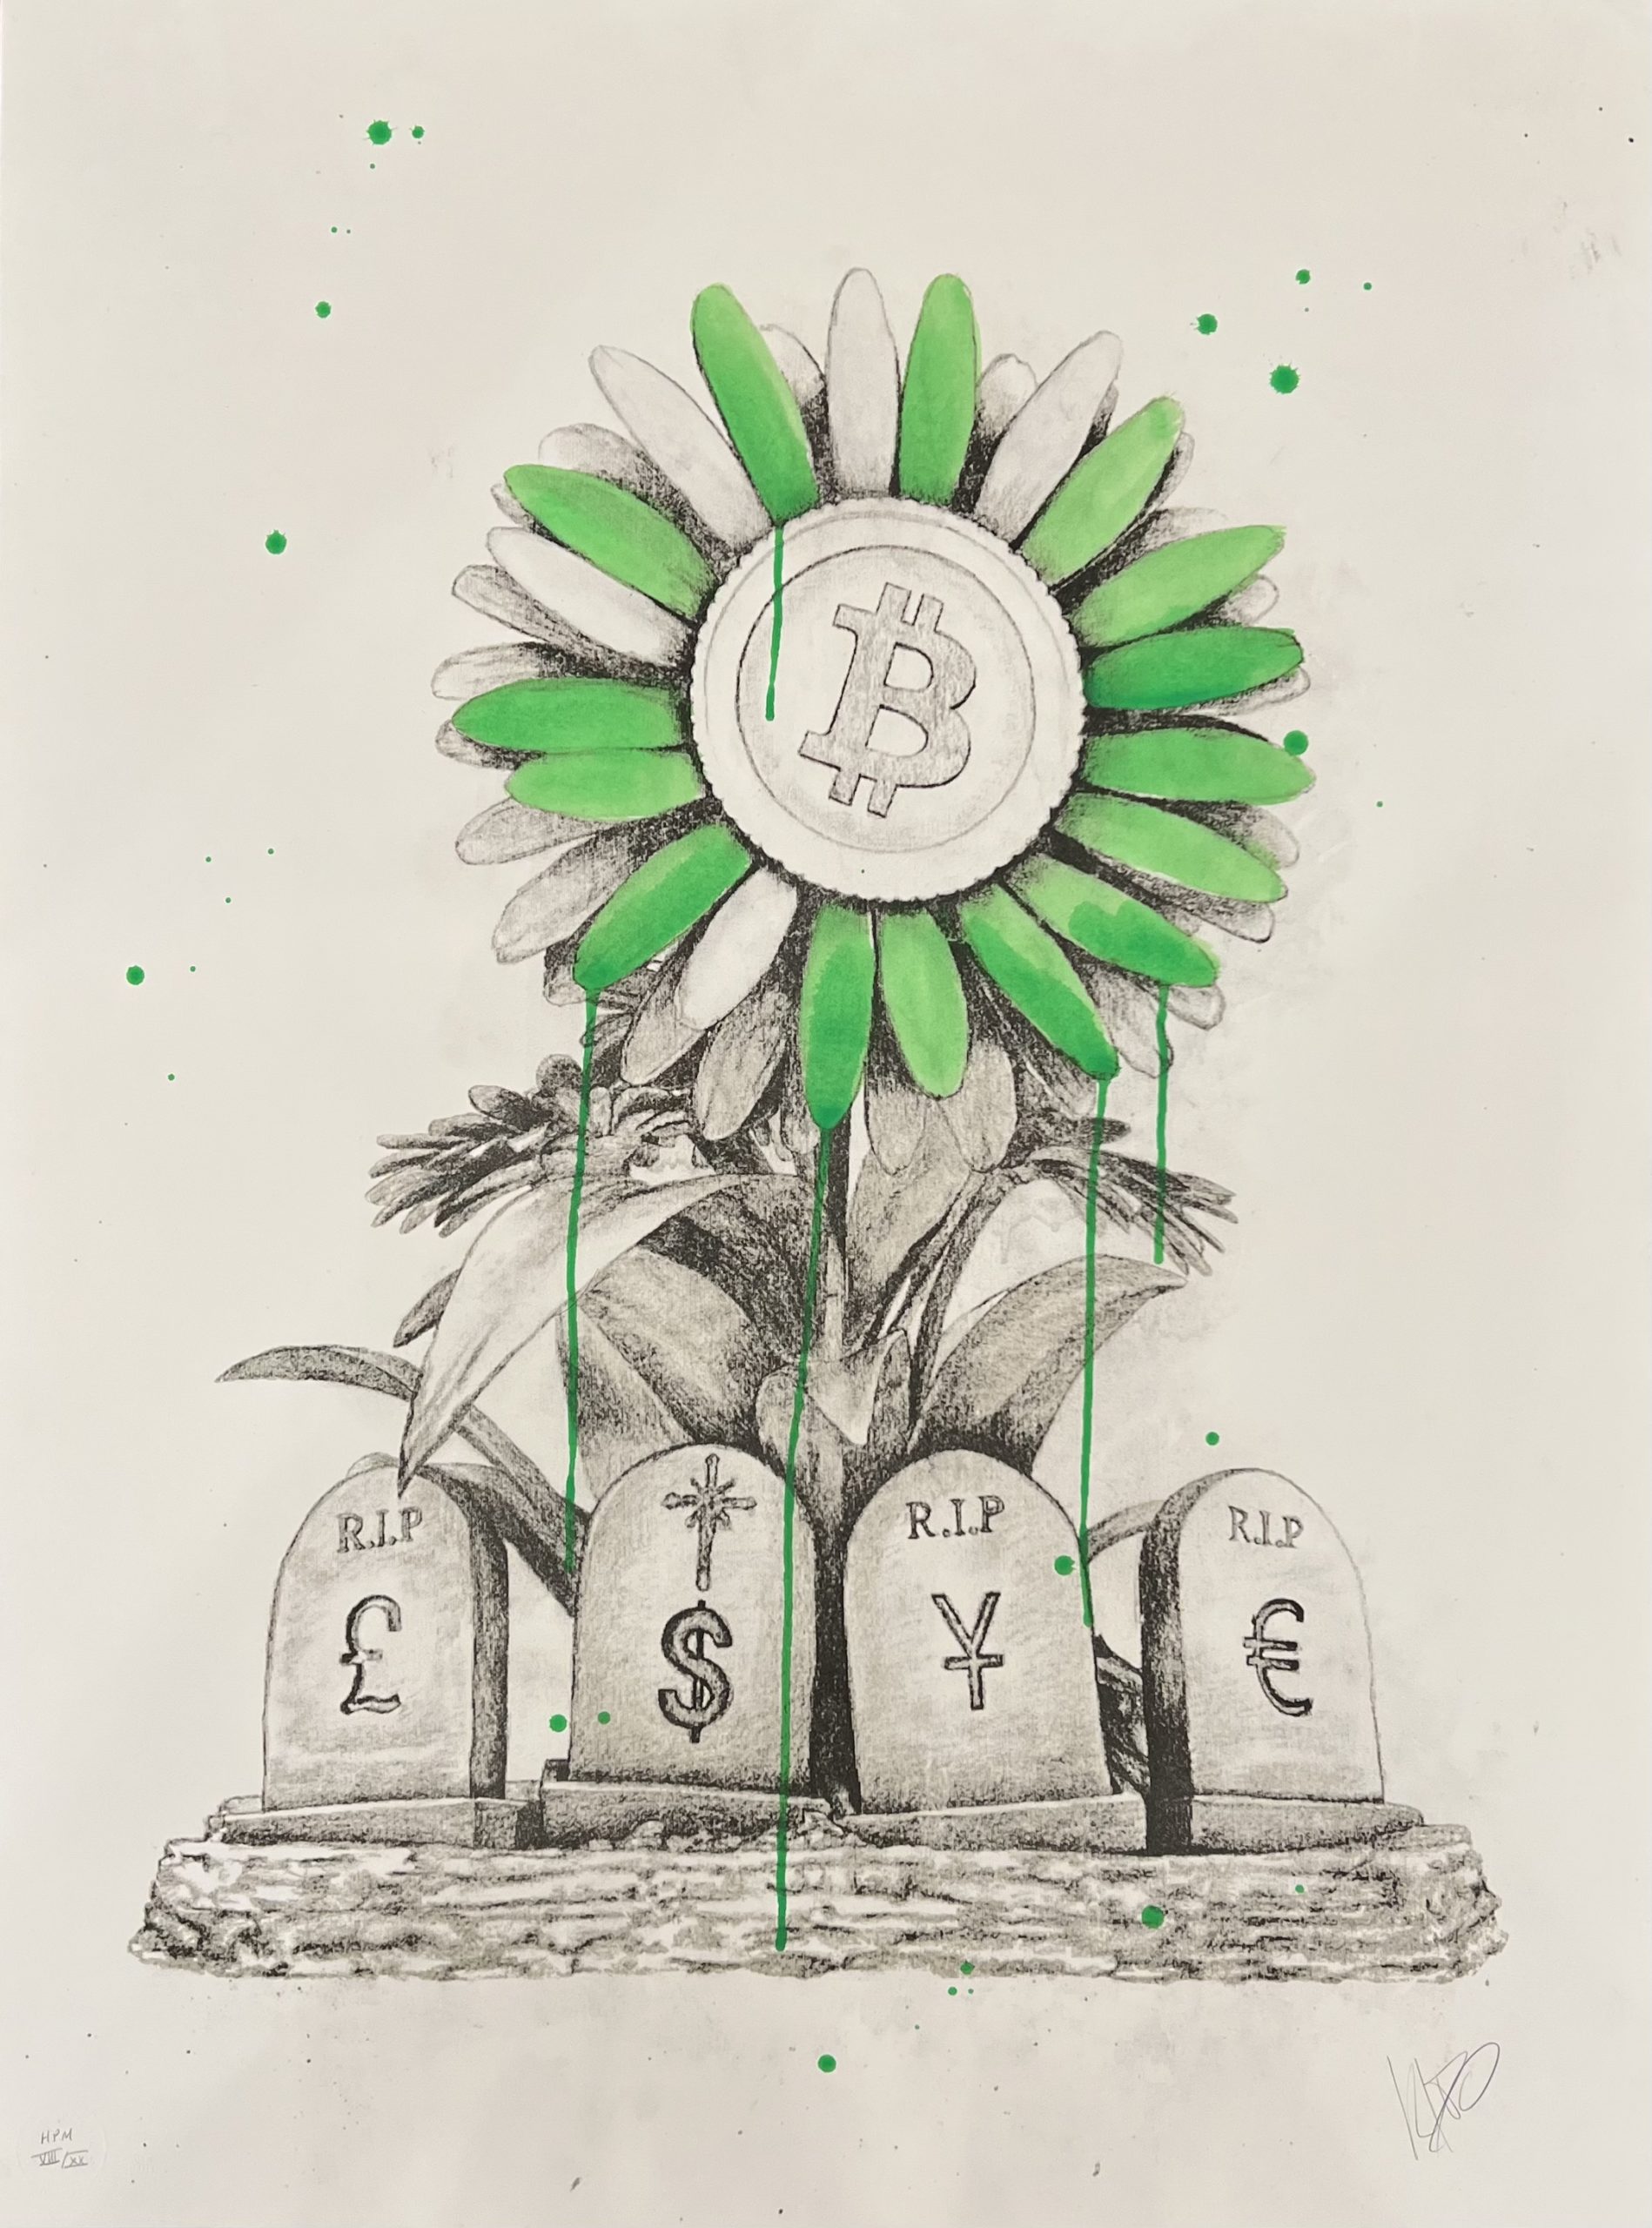 Bitcoin print made by Ludo